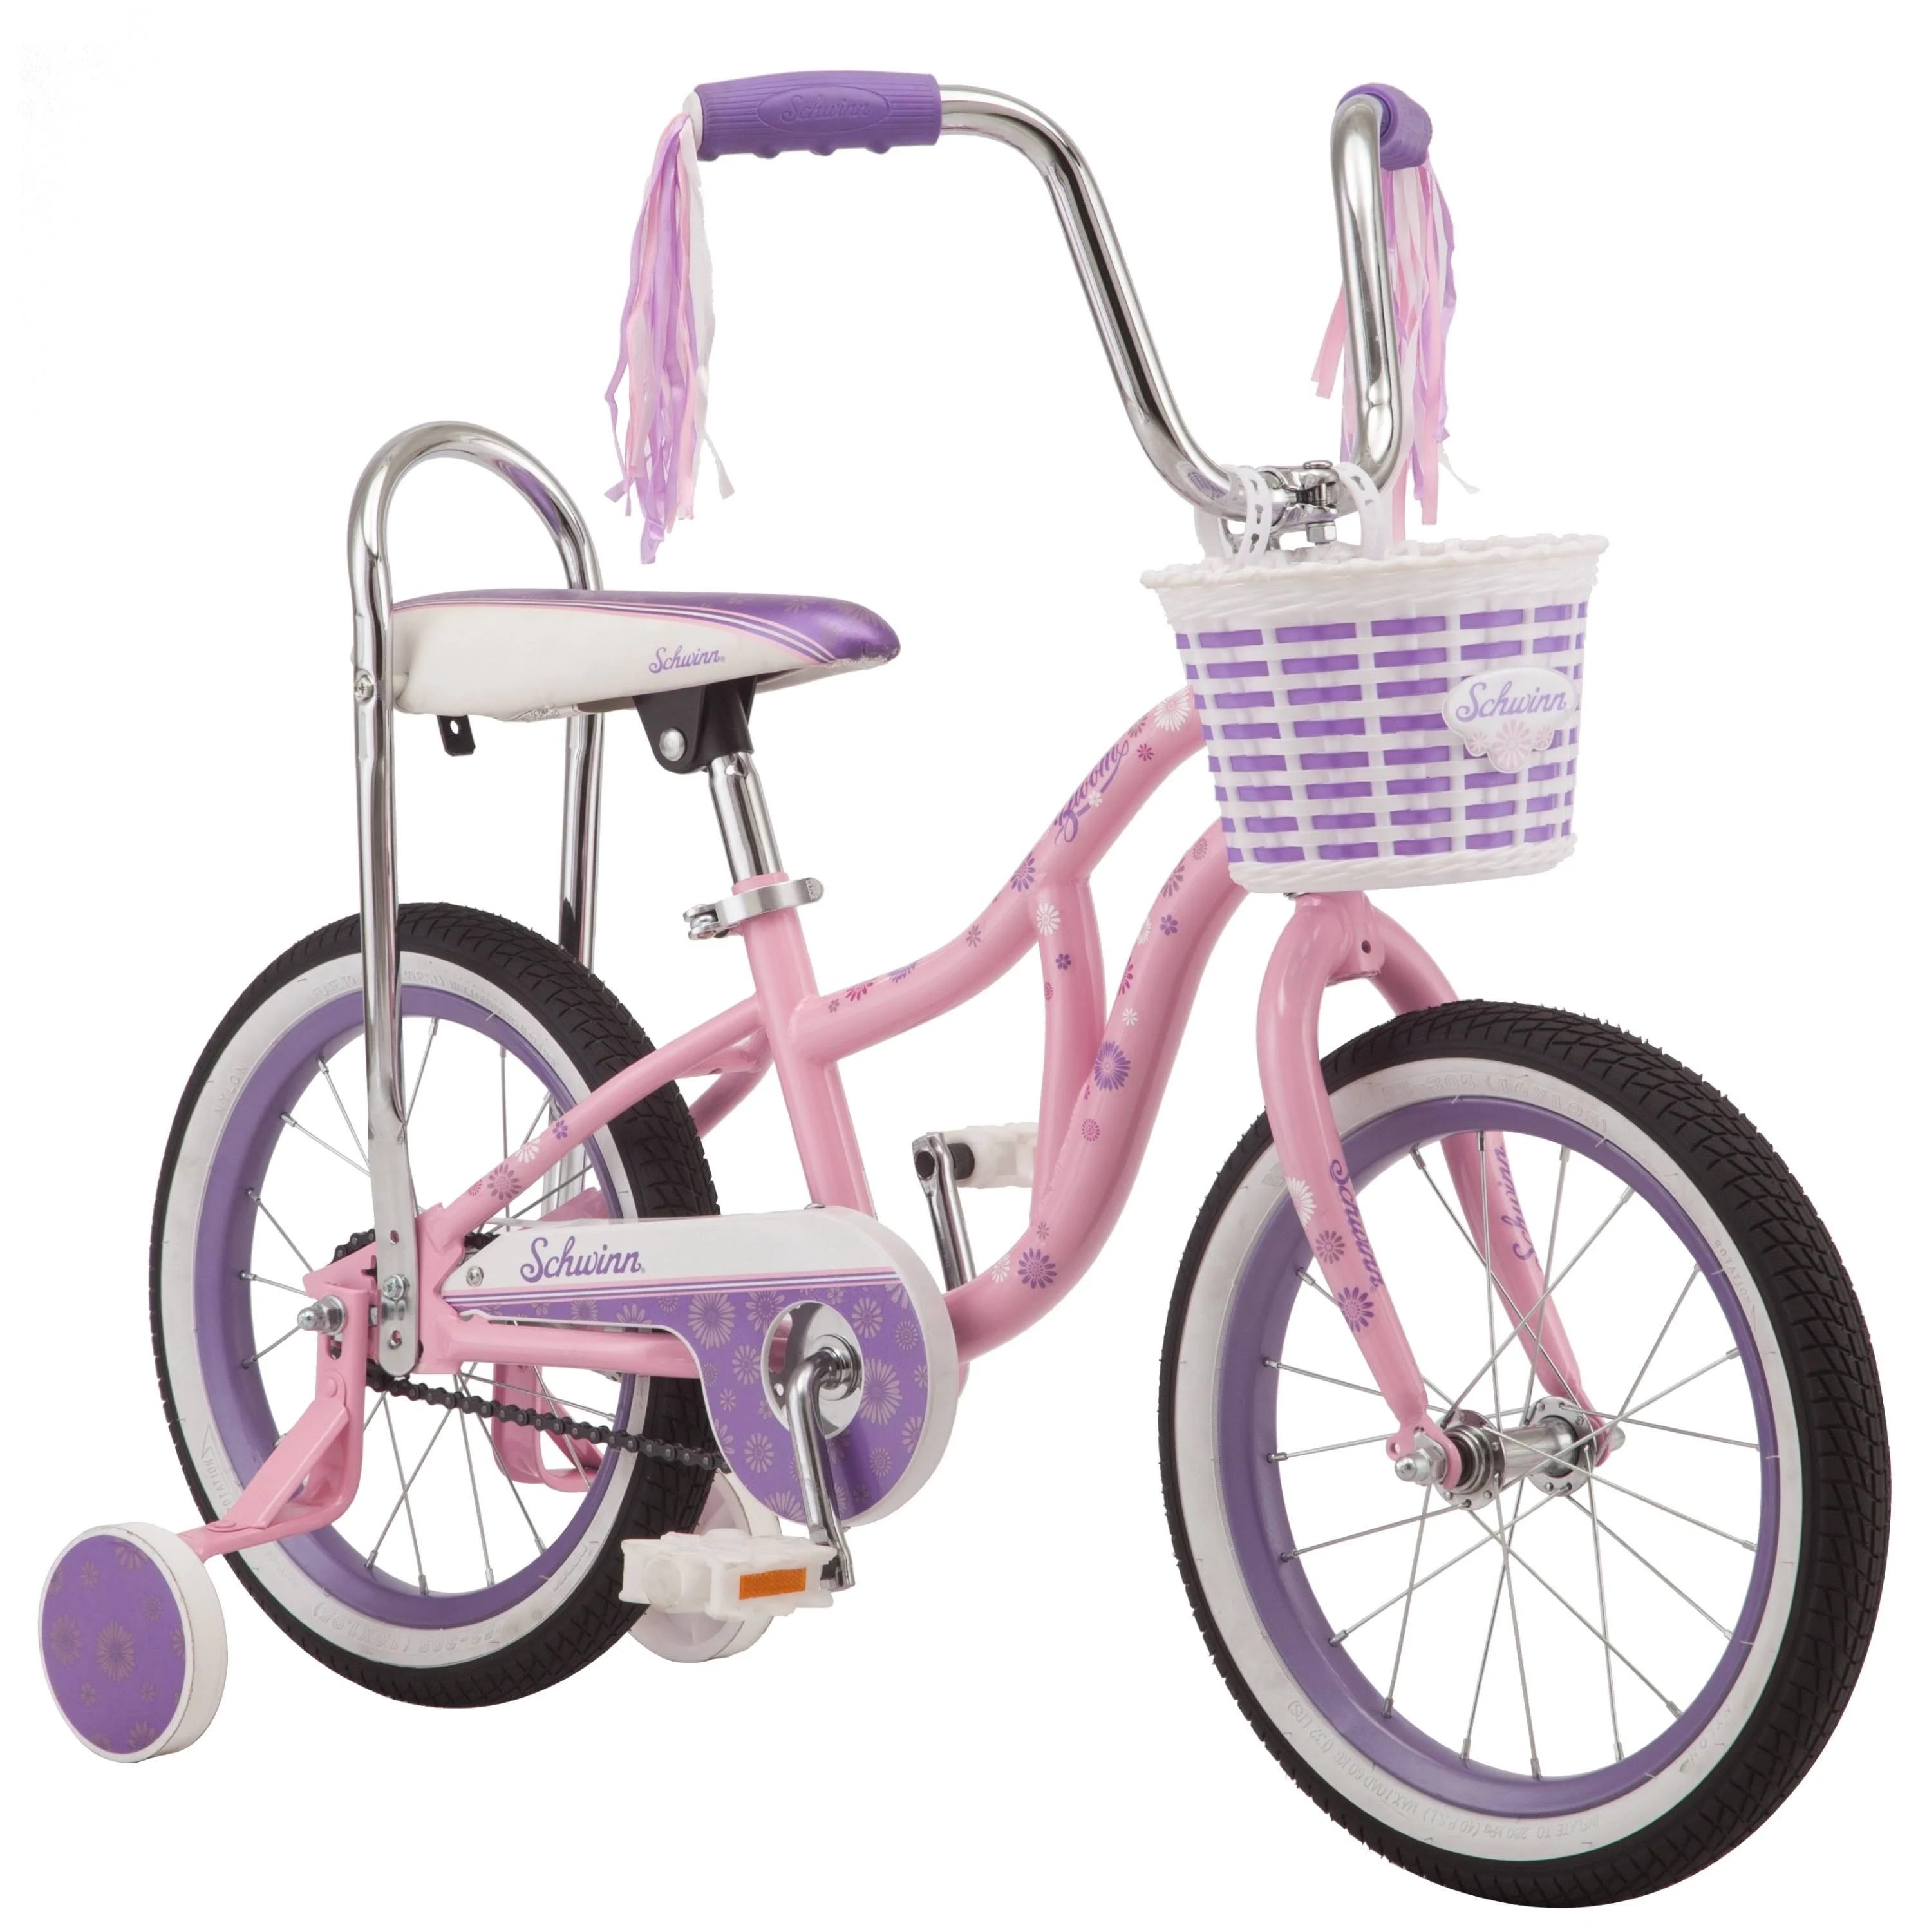 Schwinn Bloom Kids Bike with Adjustable Seat and Delightful Features | Image